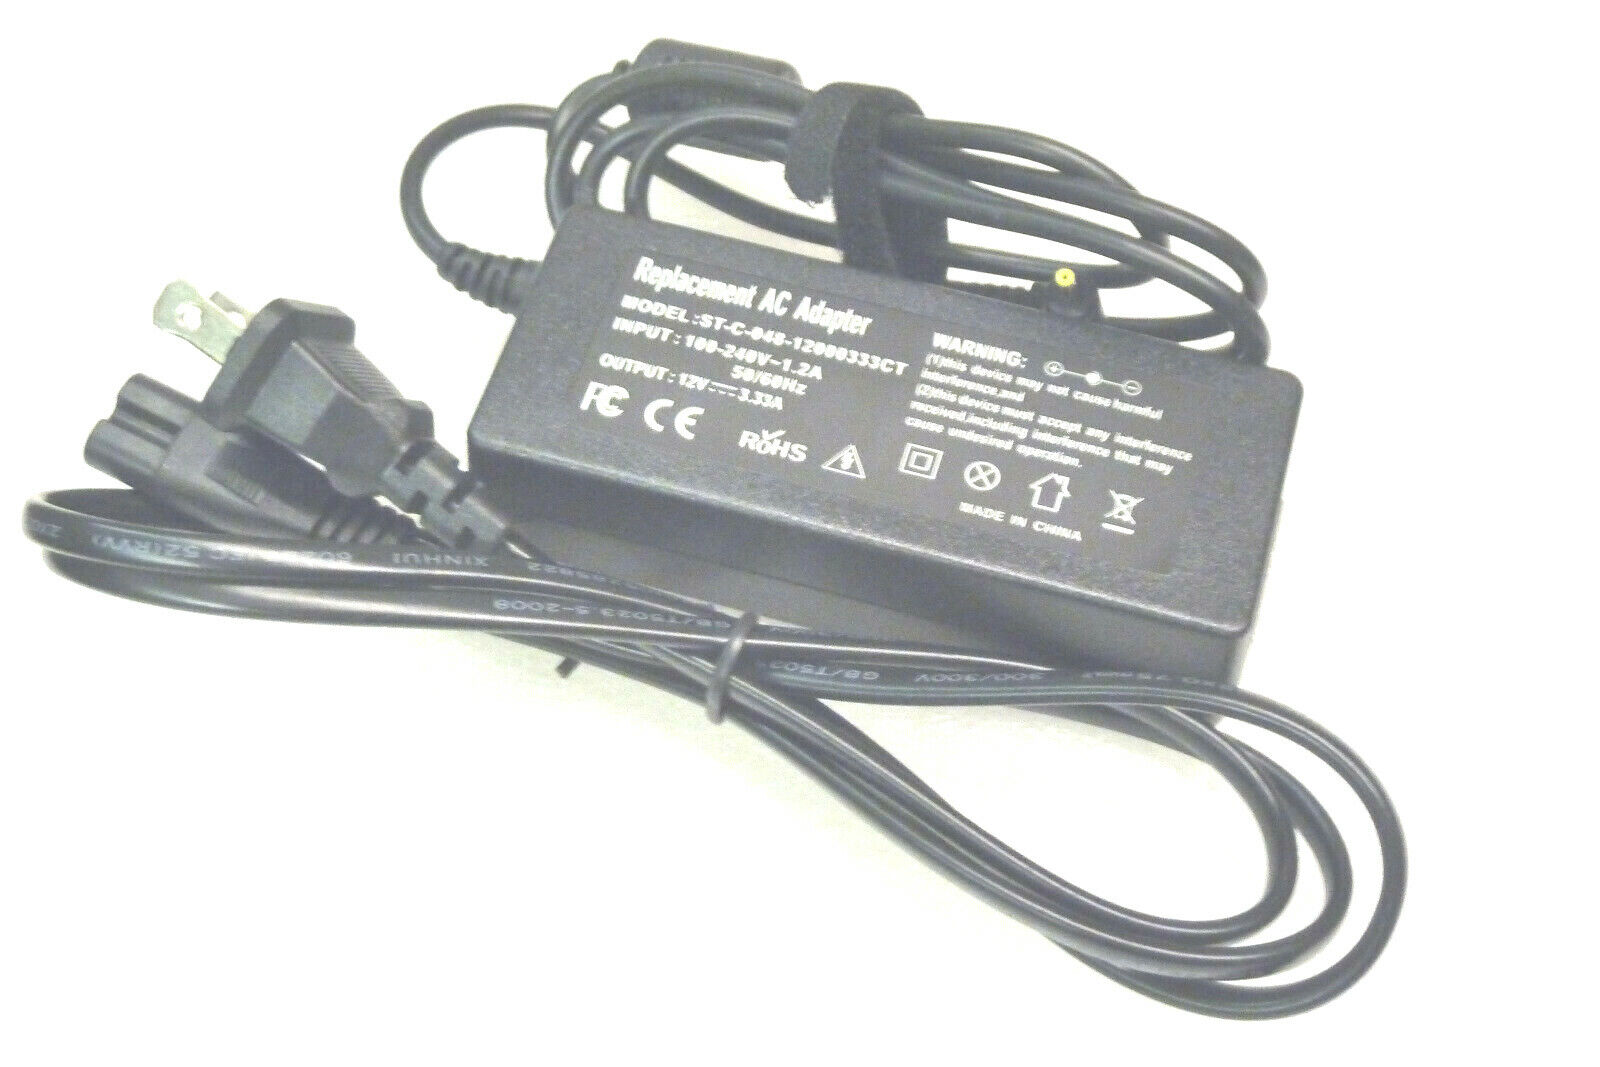 Samsung Chromebook XE501C13-K01US XE501C13-K02US Charger AC Adapter Power Cord